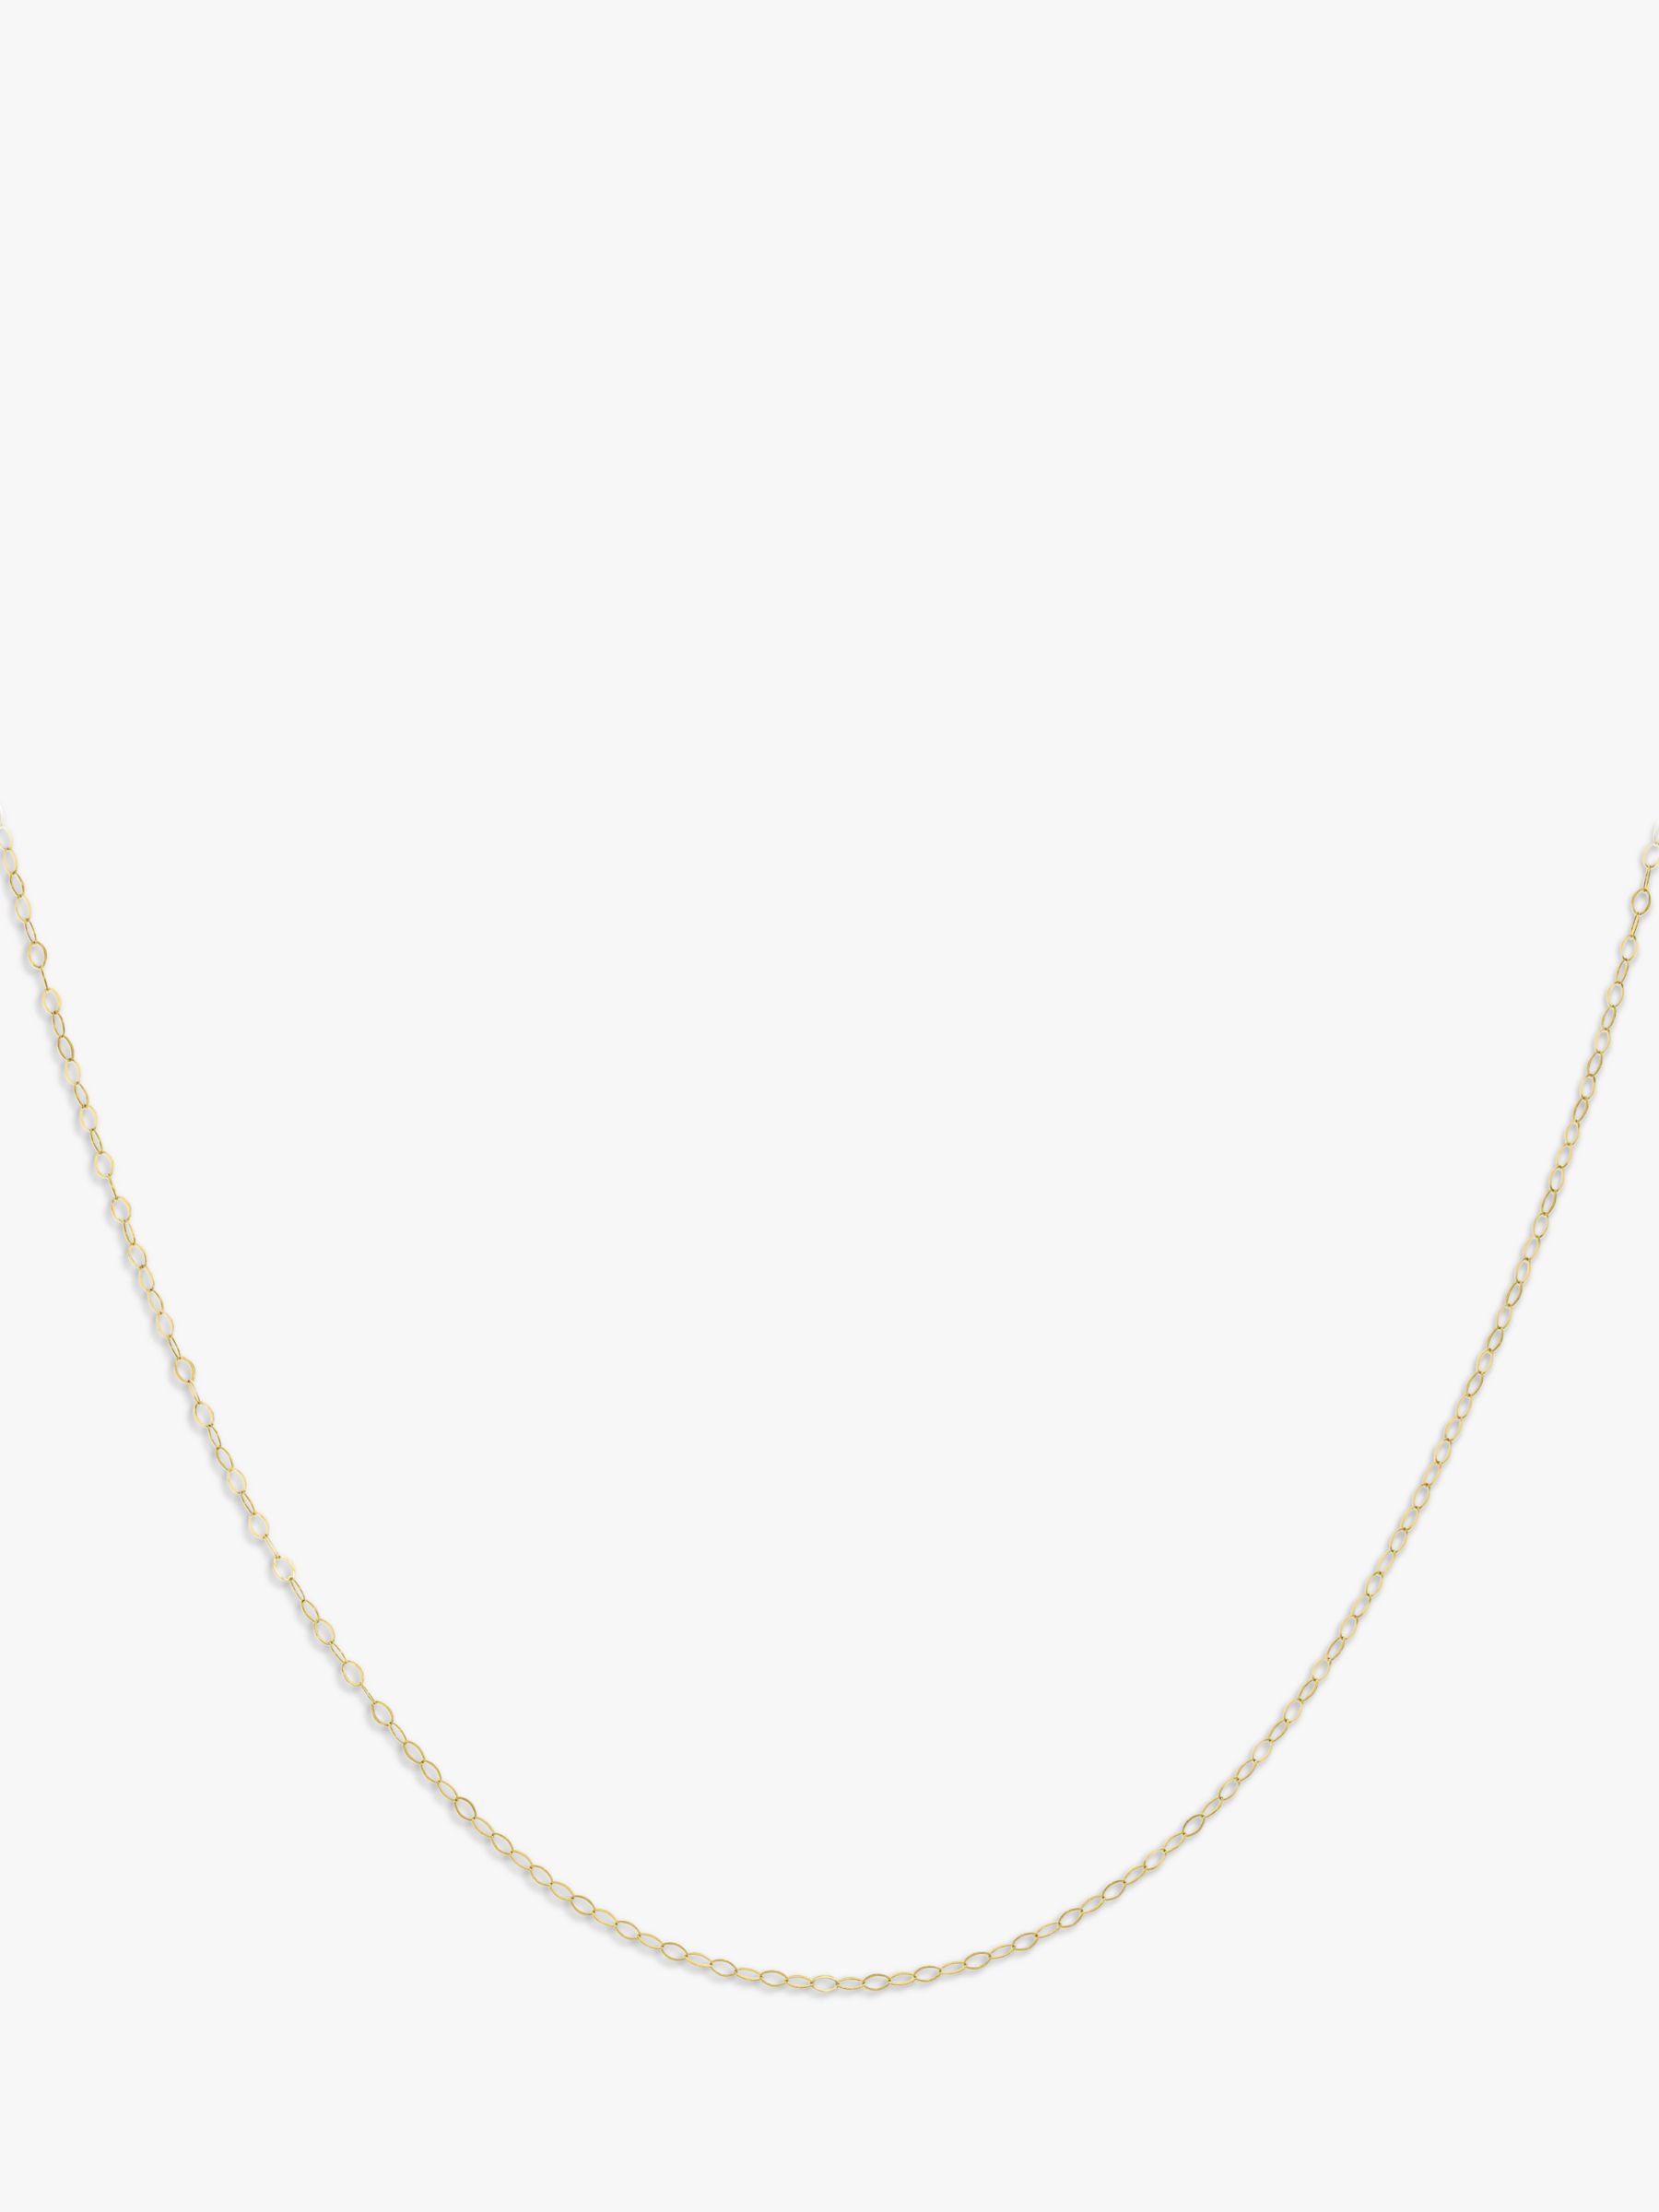 IBB 9ct Yellow Gold Short Loose Link Chain Necklace, Gold at John Lewis ...